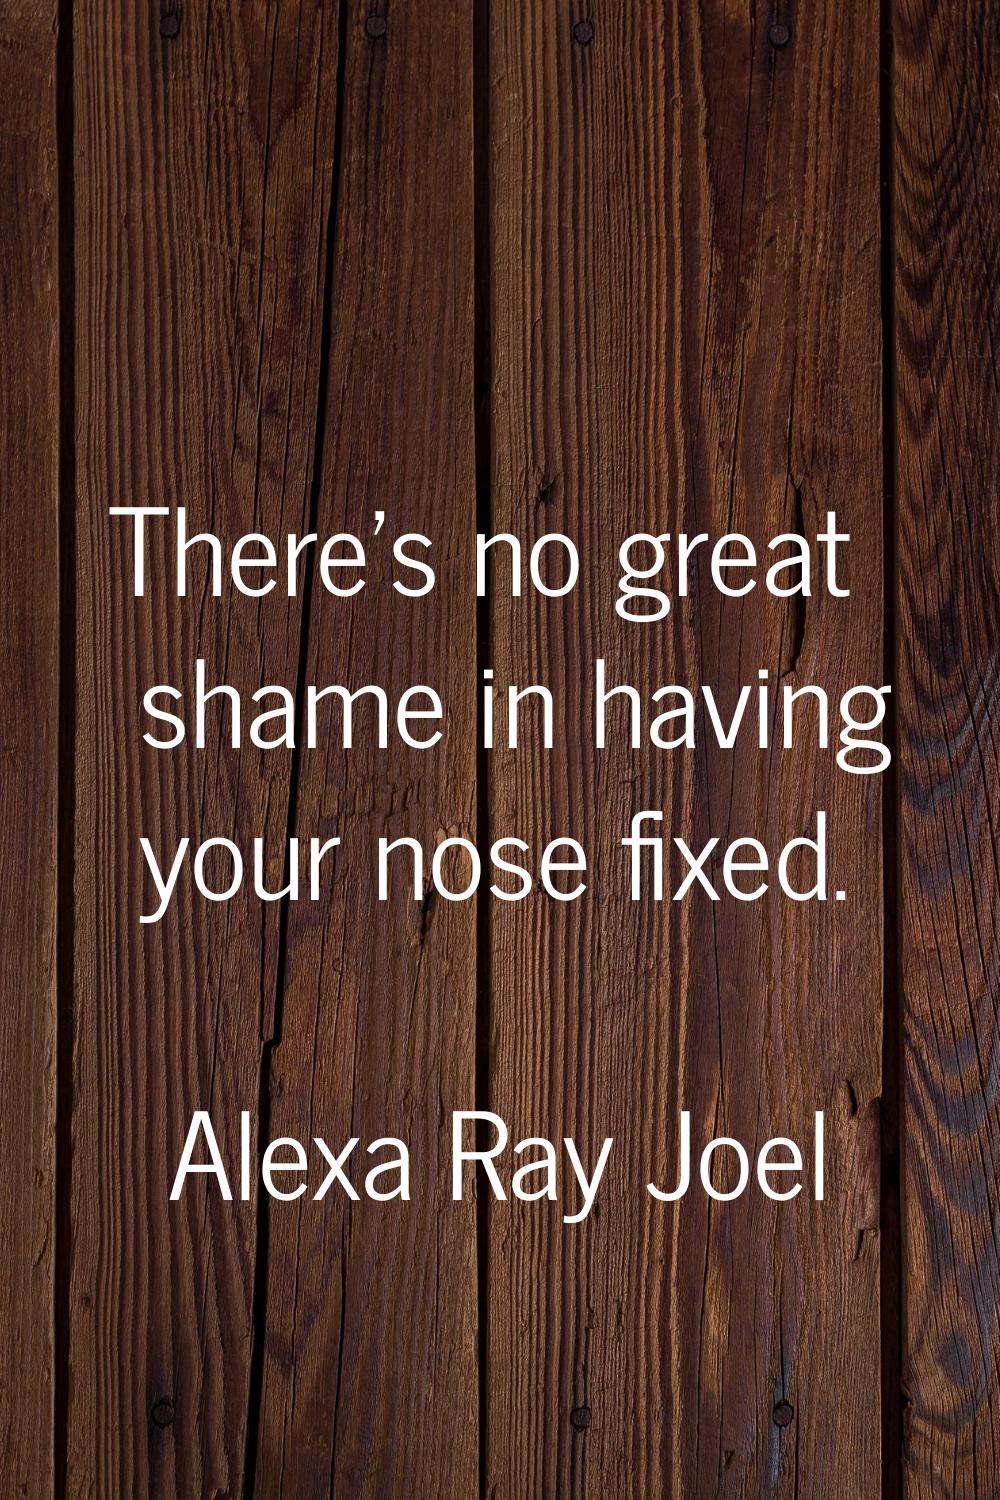 There's no great shame in having your nose fixed.